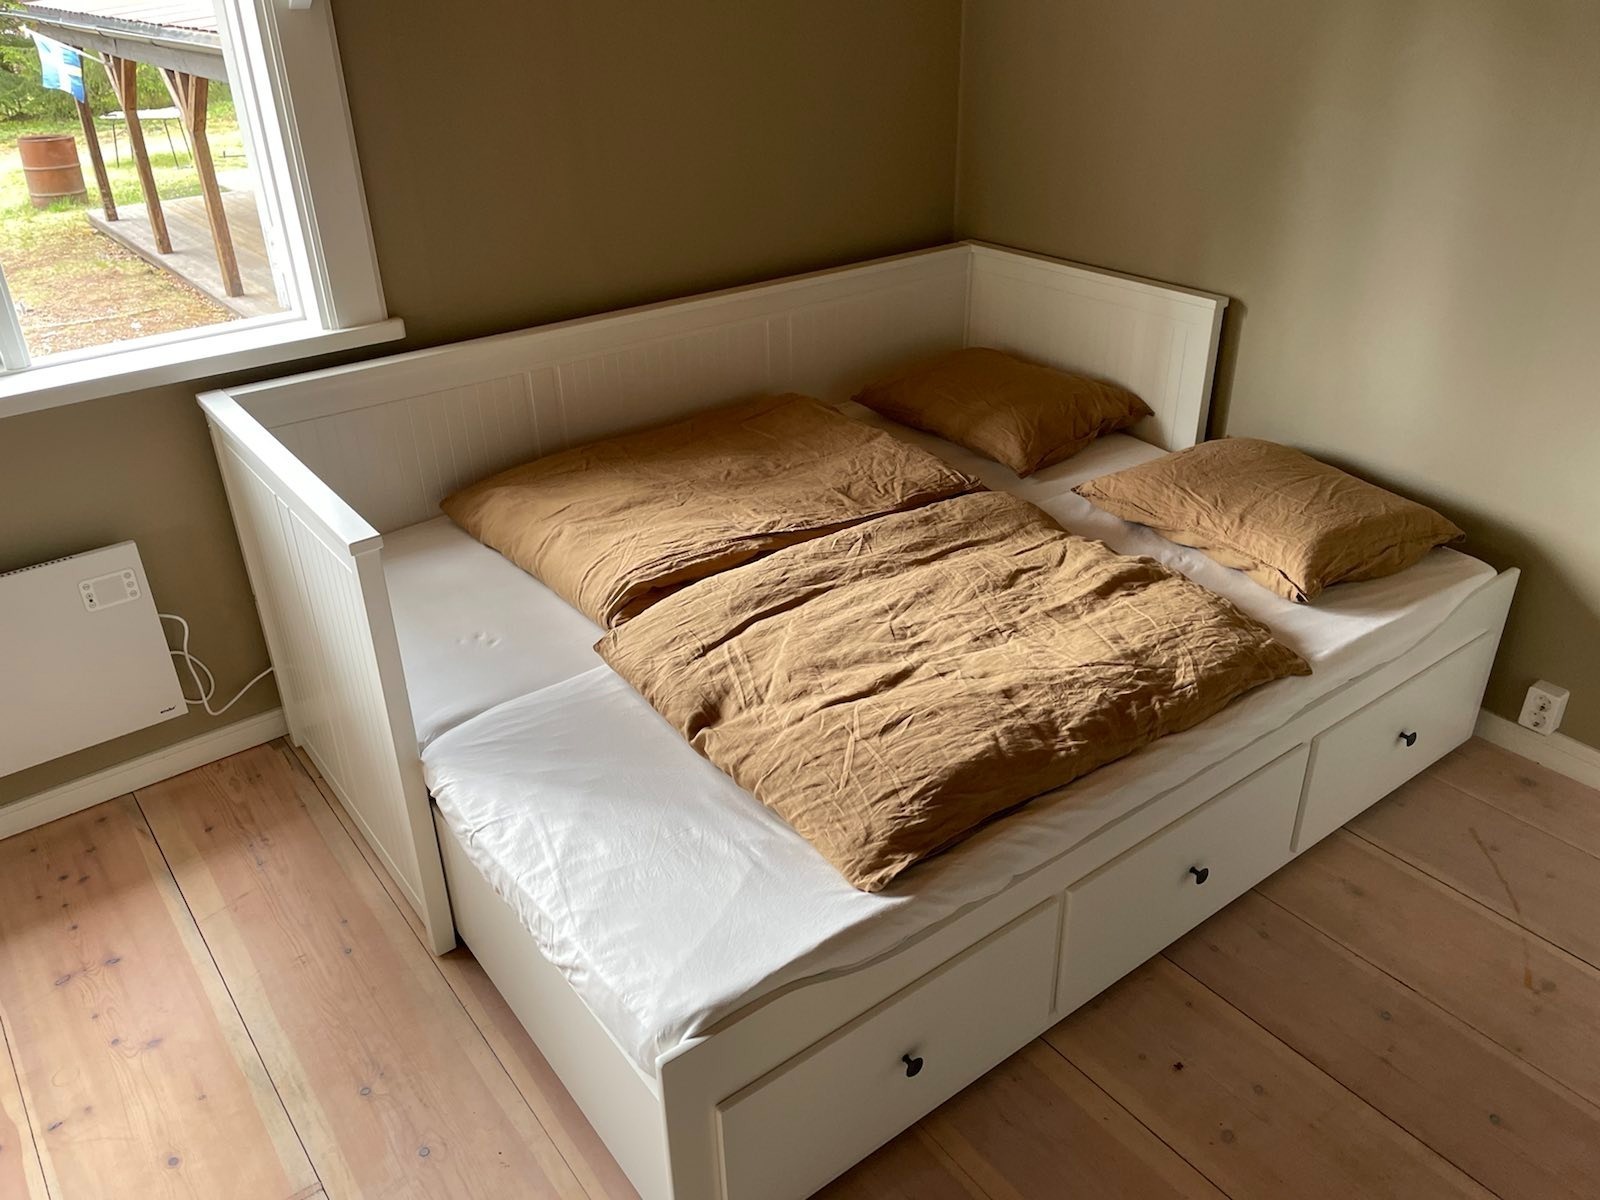 The width of the bed is 168cm and the length 2m. If one person is taller, sleep on the right side :-)